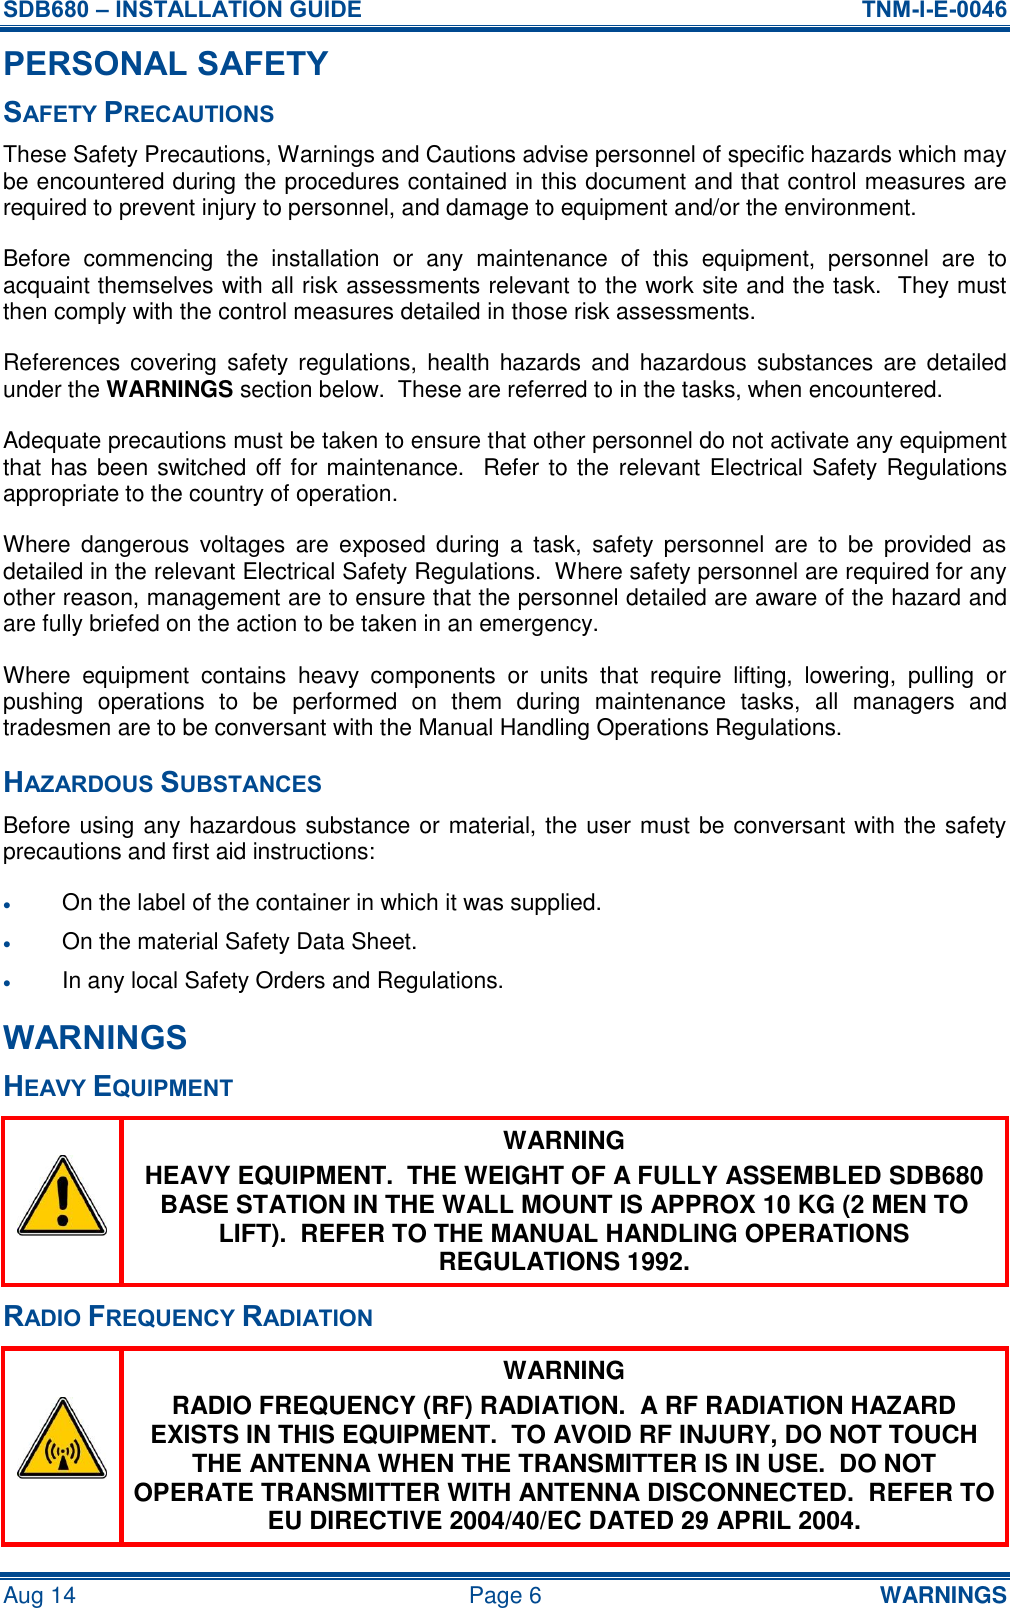 SDB680 – INSTALLATION GUIDE  TNM-I-E-0046 Aug 14  Page 6  WARNINGS PERSONAL SAFETY SAFETY PRECAUTIONS These Safety Precautions, Warnings and Cautions advise personnel of specific hazards which may be encountered during the procedures contained in this document and that control measures are required to prevent injury to personnel, and damage to equipment and/or the environment. Before  commencing  the  installation  or  any  maintenance  of  this  equipment,  personnel  are  to acquaint themselves with all risk assessments relevant to the work site and the task.  They must then comply with the control measures detailed in those risk assessments. References covering  safety  regulations, health  hazards and  hazardous substances  are  detailed under the WARNINGS section below.  These are referred to in the tasks, when encountered. Adequate precautions must be taken to ensure that other personnel do not activate any equipment that has been switched off for maintenance.  Refer to the  relevant Electrical Safety Regulations appropriate to the country of operation. Where  dangerous  voltages  are  exposed  during  a  task,  safety  personnel  are  to  be  provided  as detailed in the relevant Electrical Safety Regulations.  Where safety personnel are required for any other reason, management are to ensure that the personnel detailed are aware of the hazard and are fully briefed on the action to be taken in an emergency. Where  equipment  contains  heavy  components  or  units  that  require  lifting,  lowering,  pulling  or pushing  operations  to  be  performed  on  them  during  maintenance  tasks,  all  managers  and tradesmen are to be conversant with the Manual Handling Operations Regulations. HAZARDOUS SUBSTANCES Before using any hazardous substance or material, the user must be conversant with the safety precautions and first aid instructions:  On the label of the container in which it was supplied.  On the material Safety Data Sheet.  In any local Safety Orders and Regulations. WARNINGS HEAVY EQUIPMENT  WARNING HEAVY EQUIPMENT.  THE WEIGHT OF A FULLY ASSEMBLED SDB680 BASE STATION IN THE WALL MOUNT IS APPROX 10 KG (2 MEN TO LIFT).  REFER TO THE MANUAL HANDLING OPERATIONS REGULATIONS 1992. RADIO FREQUENCY RADIATION  WARNING RADIO FREQUENCY (RF) RADIATION.  A RF RADIATION HAZARD EXISTS IN THIS EQUIPMENT.  TO AVOID RF INJURY, DO NOT TOUCH THE ANTENNA WHEN THE TRANSMITTER IS IN USE.  DO NOT OPERATE TRANSMITTER WITH ANTENNA DISCONNECTED.  REFER TO EU DIRECTIVE 2004/40/EC DATED 29 APRIL 2004. 